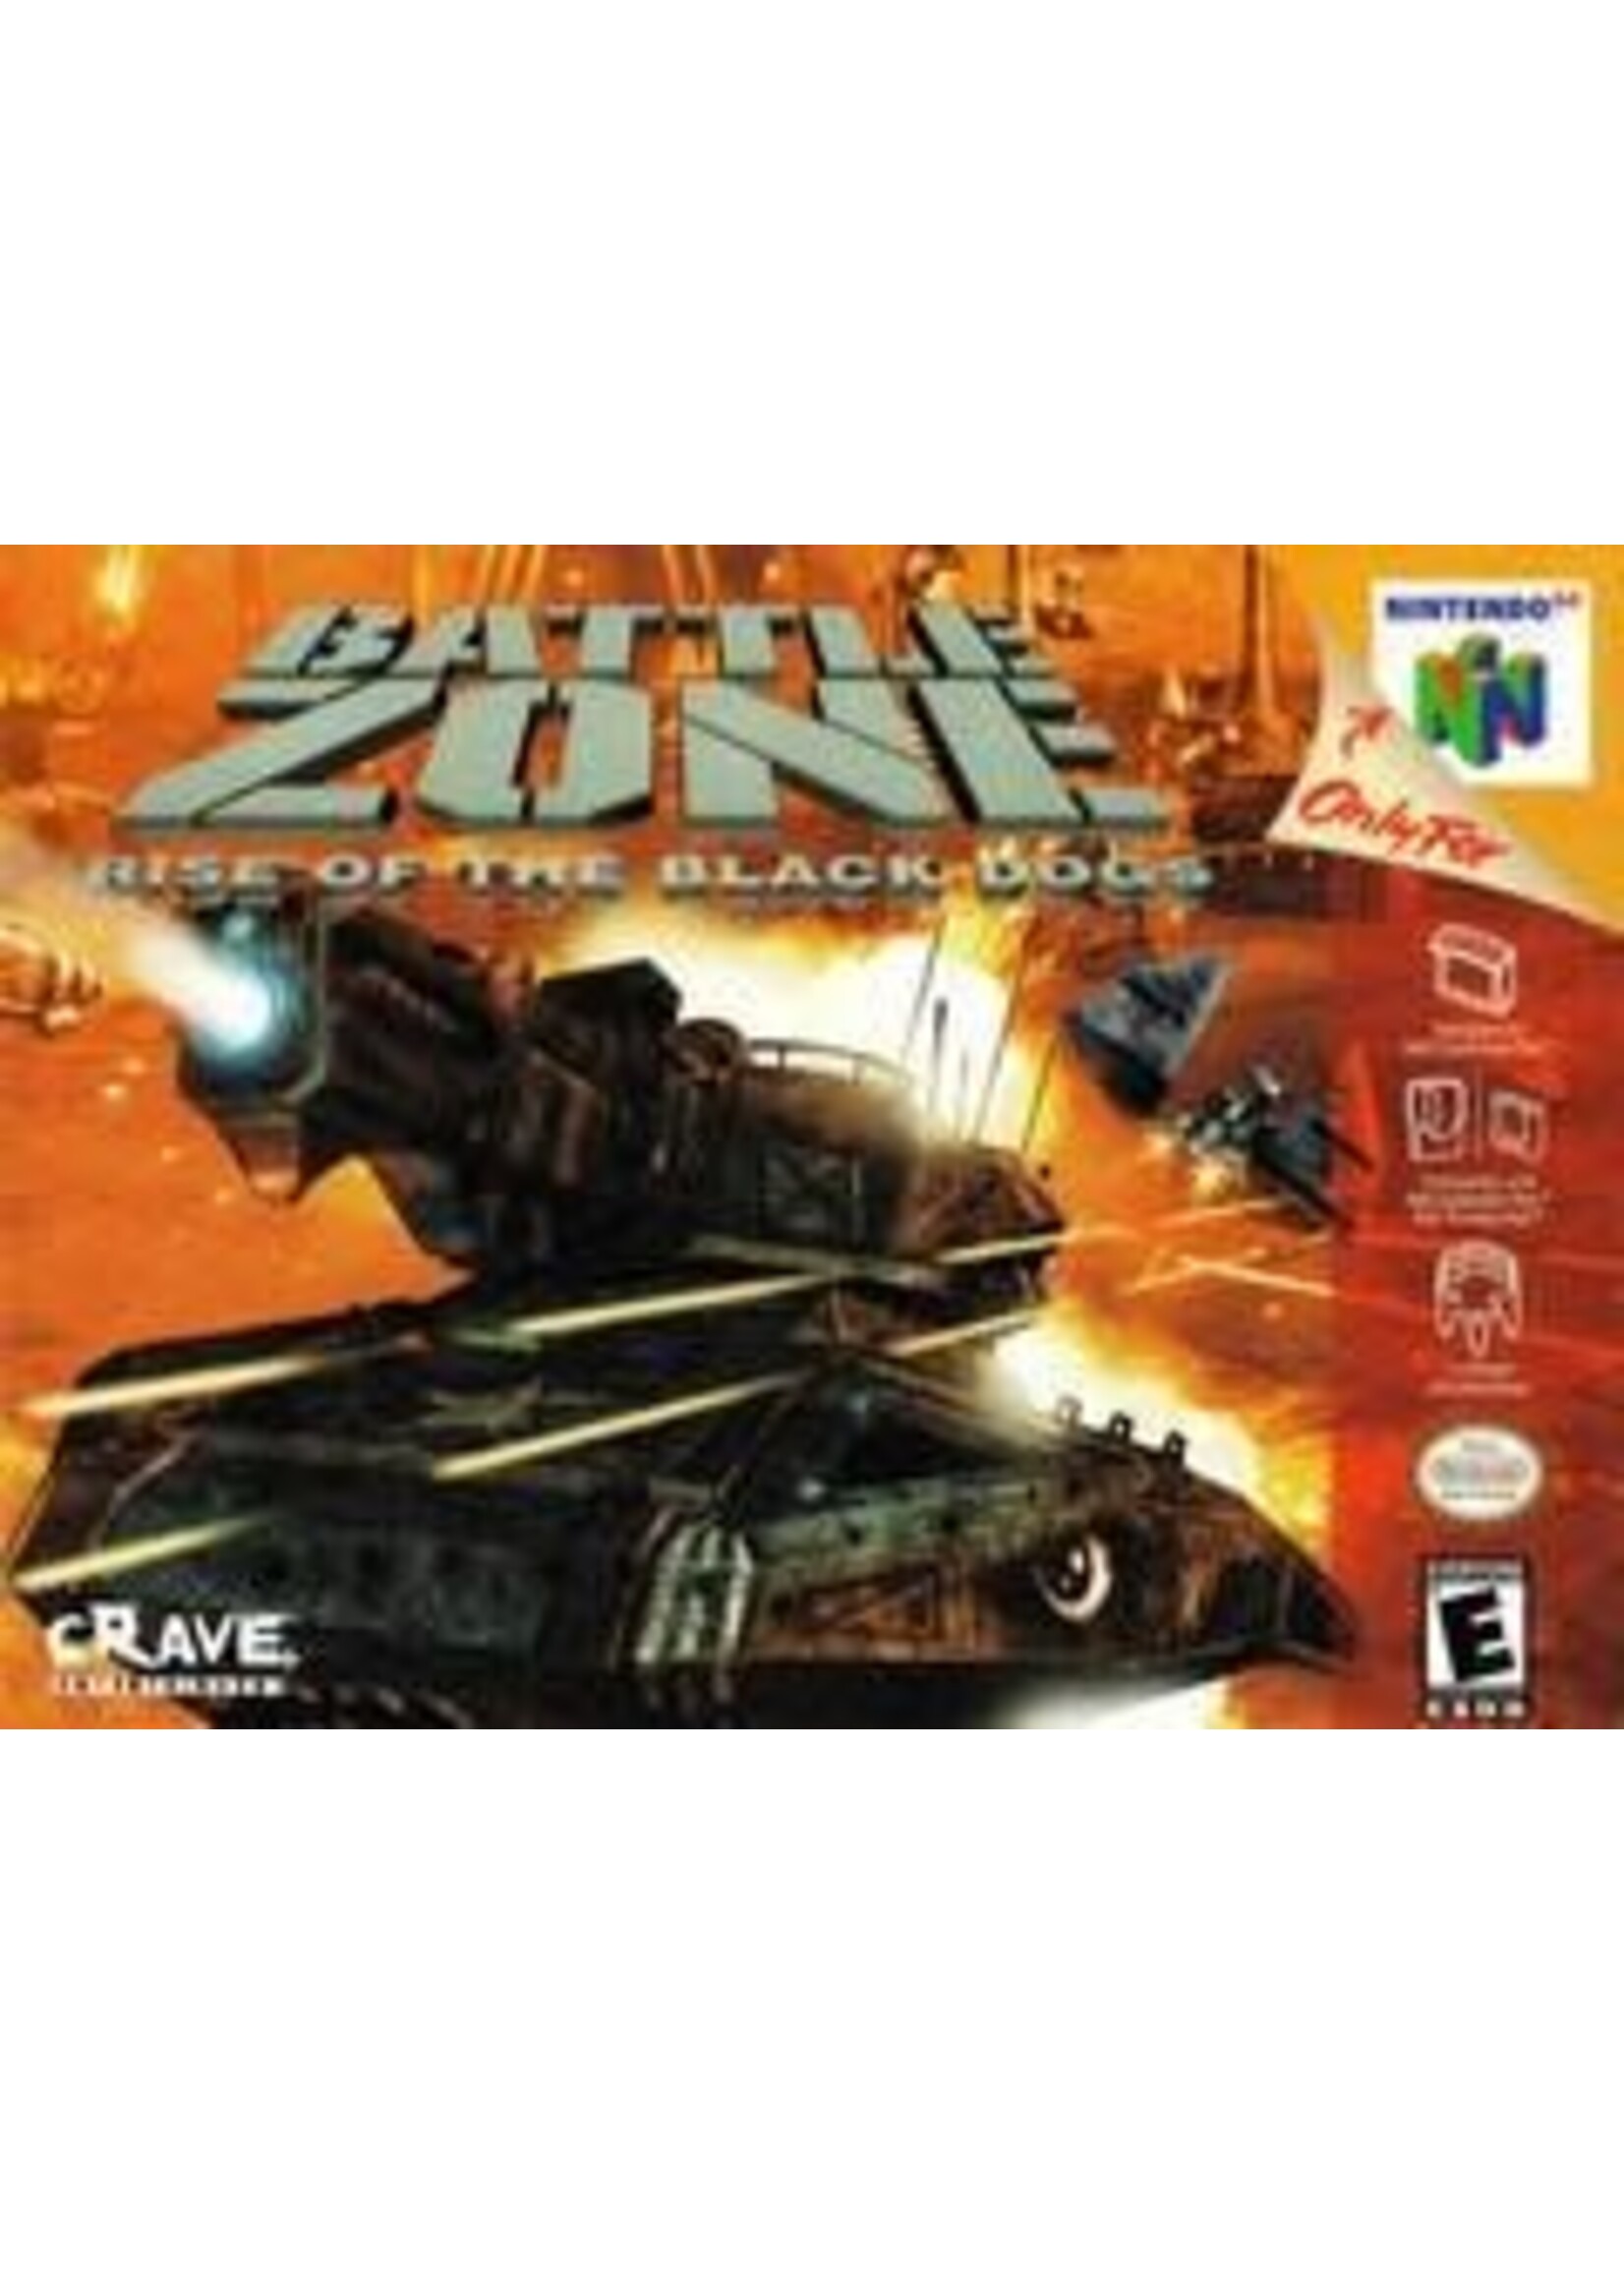 Battlezone: Rise Of The Black Dogs Nintendo 64 CART ONLY